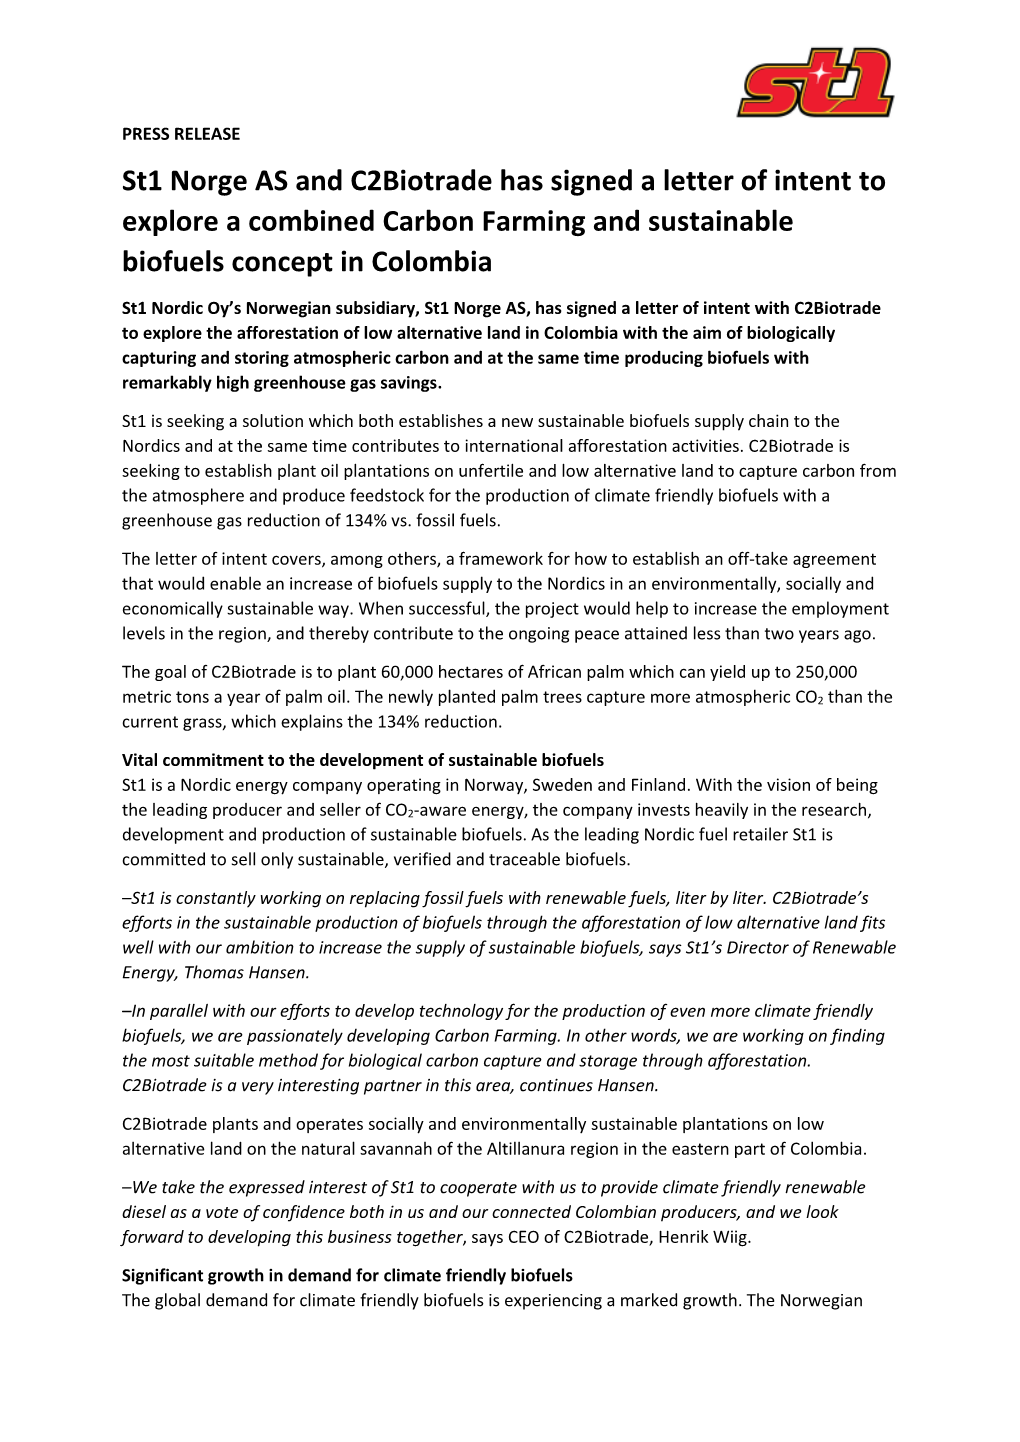 St1 Norge AS and C2biotrade Has Signed a Letter of Intent to Explore a Combined Carbon Farming and Sustainable Biofuels Concept in Colombia